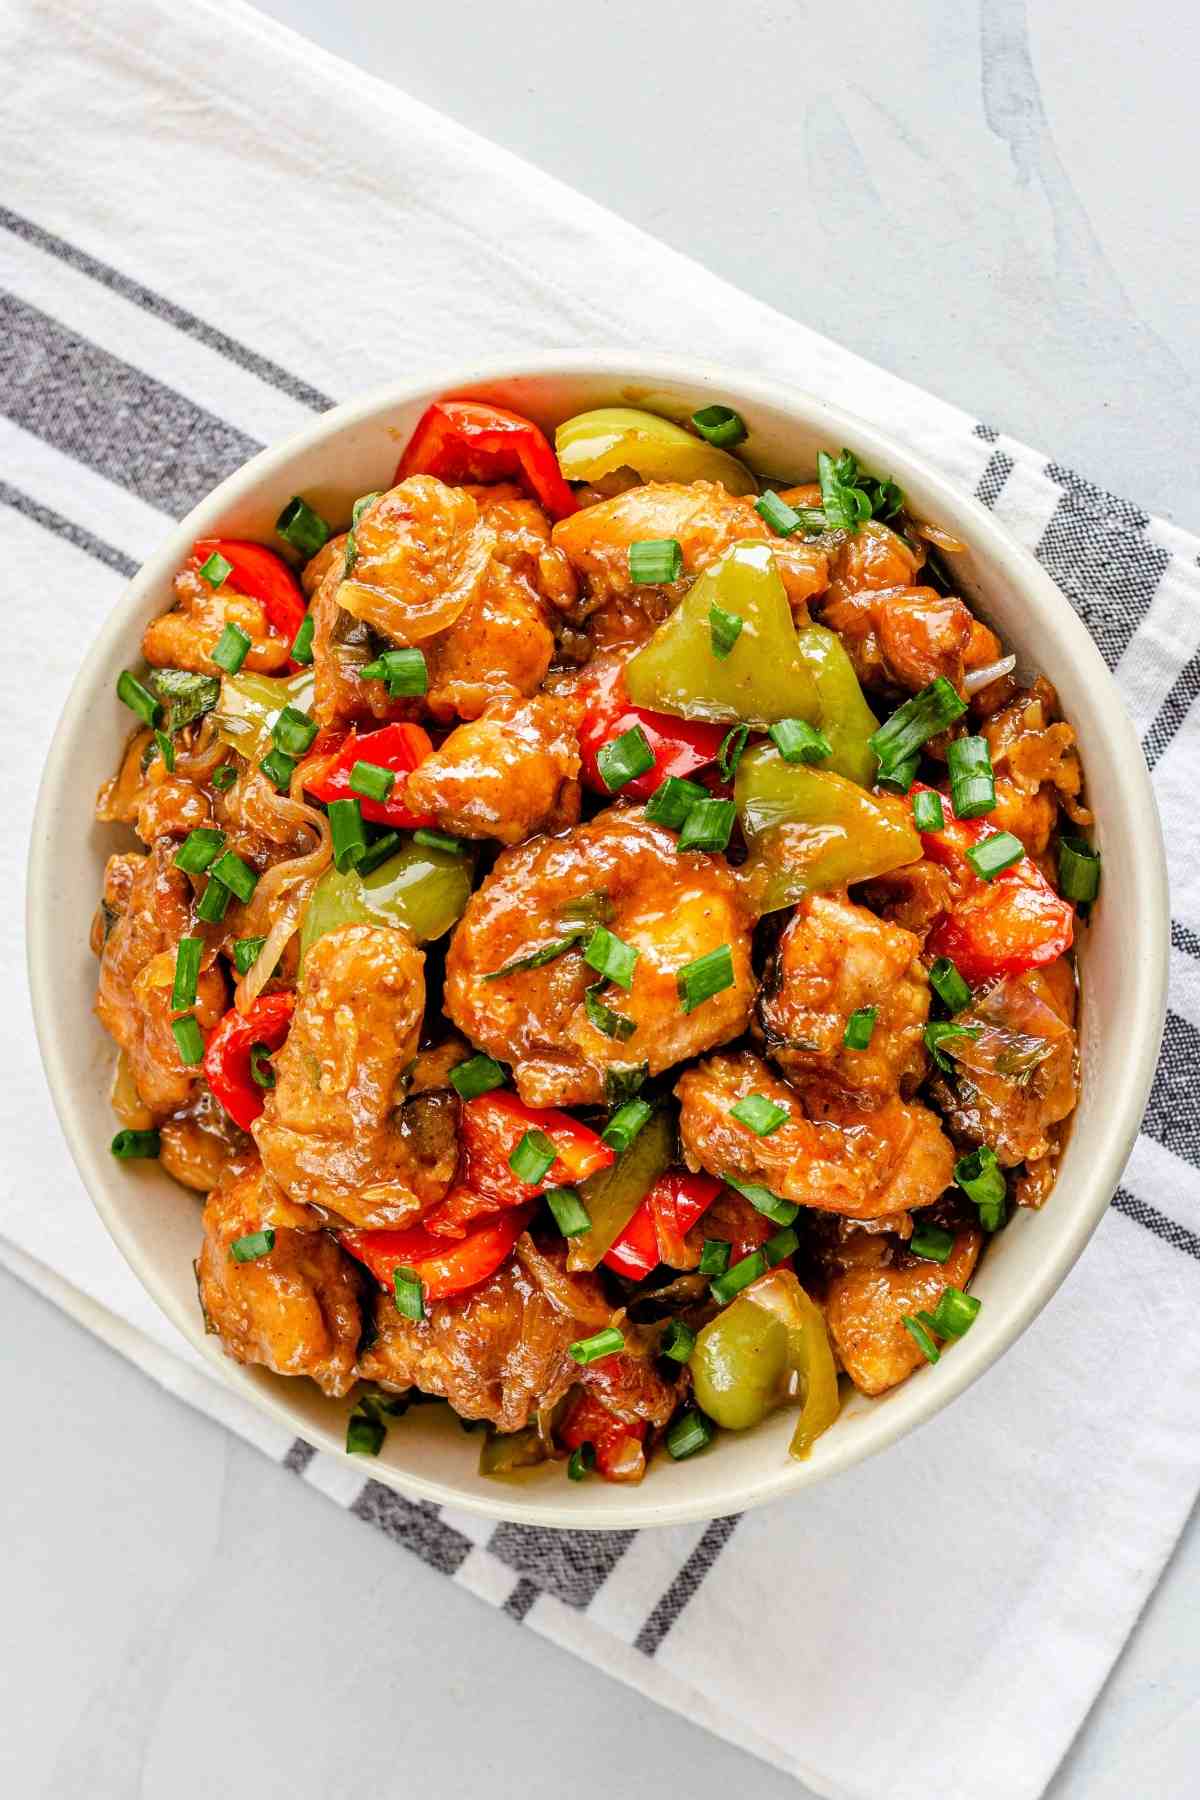 Loaded with mouthwatering flavor, this Chinese chicken is so easy to make that you will hardly believe it. Yes, you can make a tasty and healthy dish even on a busy weeknight.